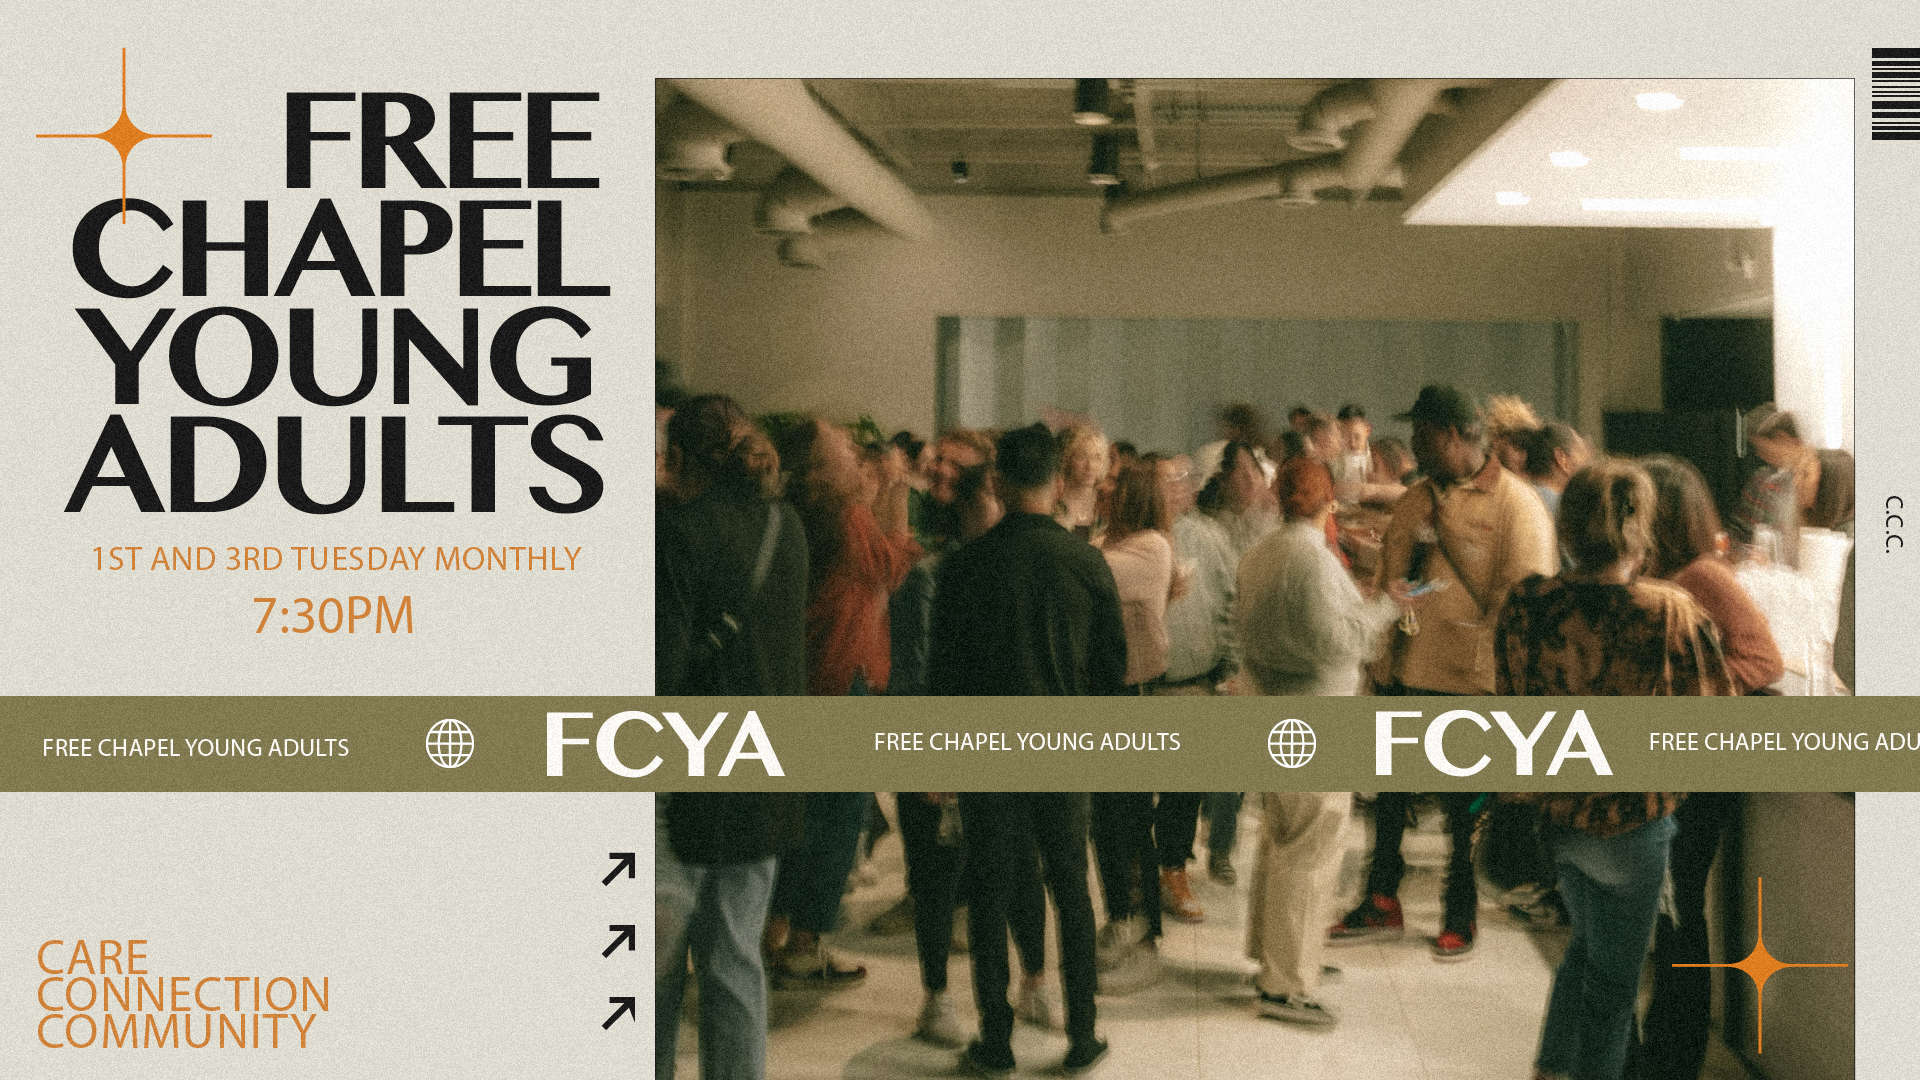 FCYA: First and Third Tuesday  at the Midtown campus